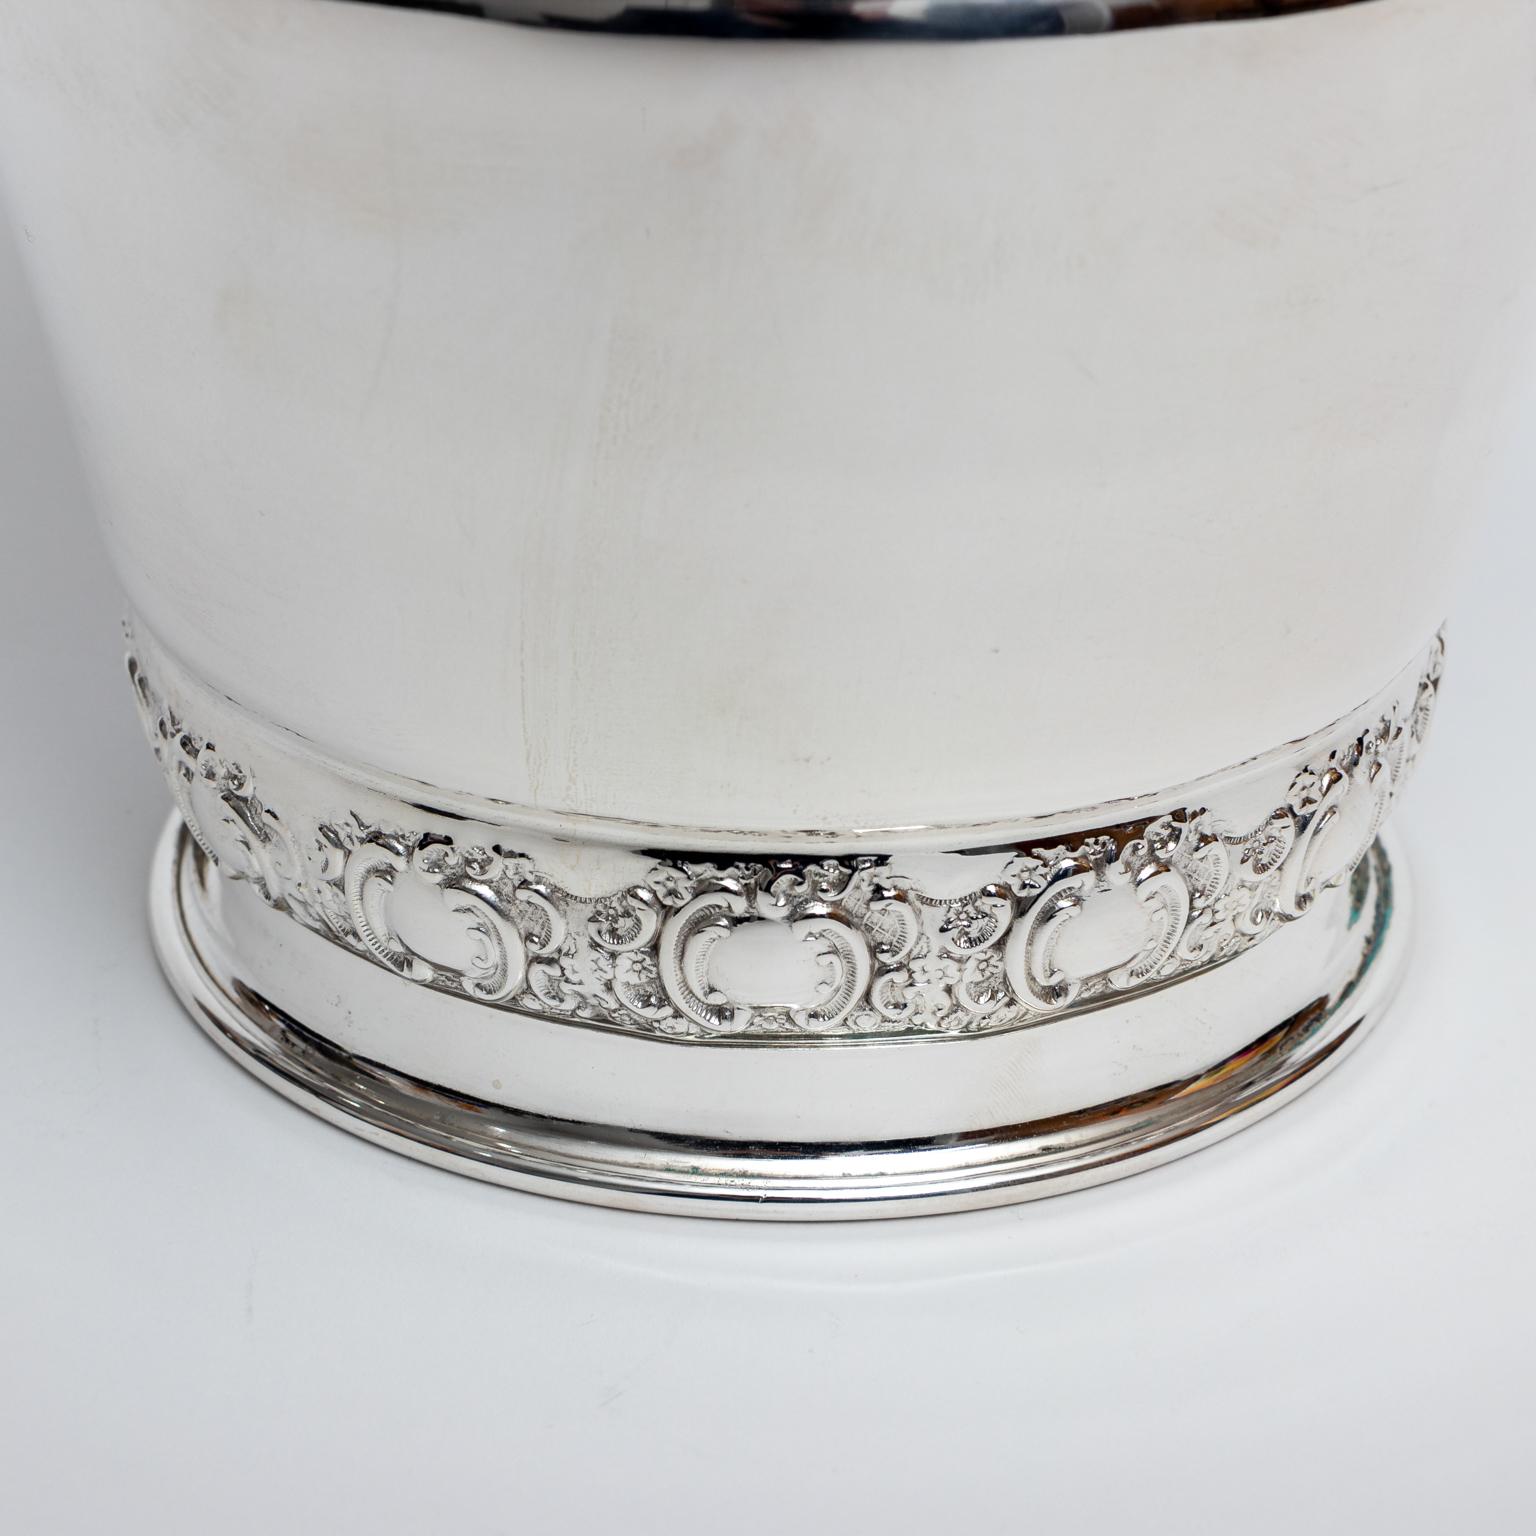 Mid-20th Century English silver plate champagne bucket or wine cooler with two bands. Please note of wear consistent with age.